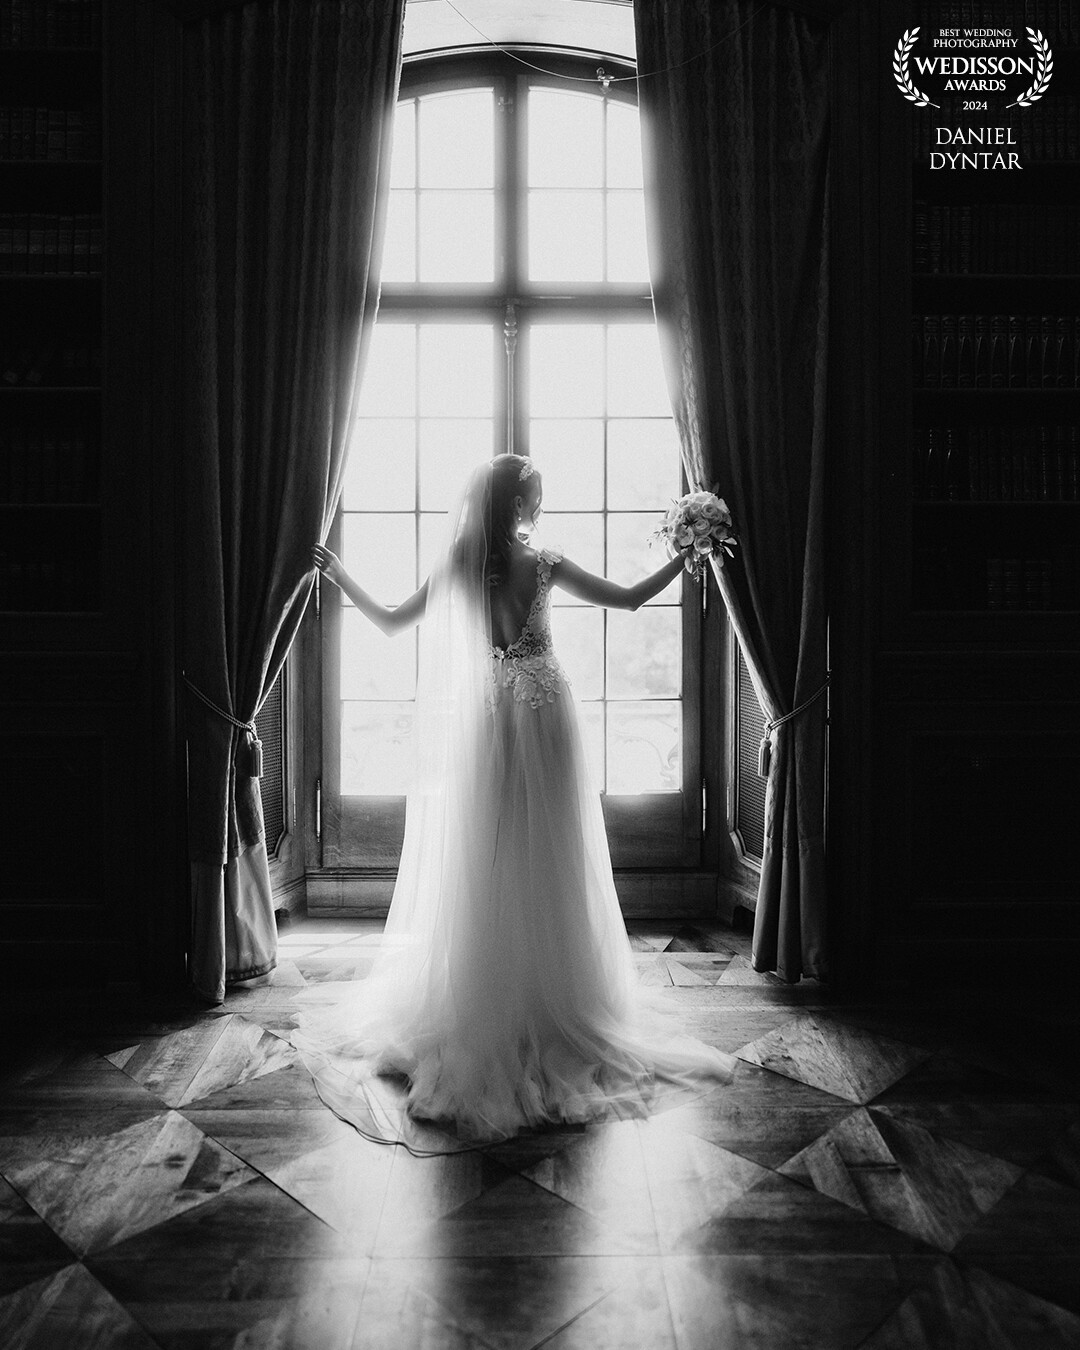 This location was a blast at St. Charles Hall in Meggen near lucerne in Switzerland. And the bride was awesome too. Was such a pleasure to have actually both the groom and the bride in front of my camera. Love zo take images with this kind of windows. It creates this elegance and epic pictures.